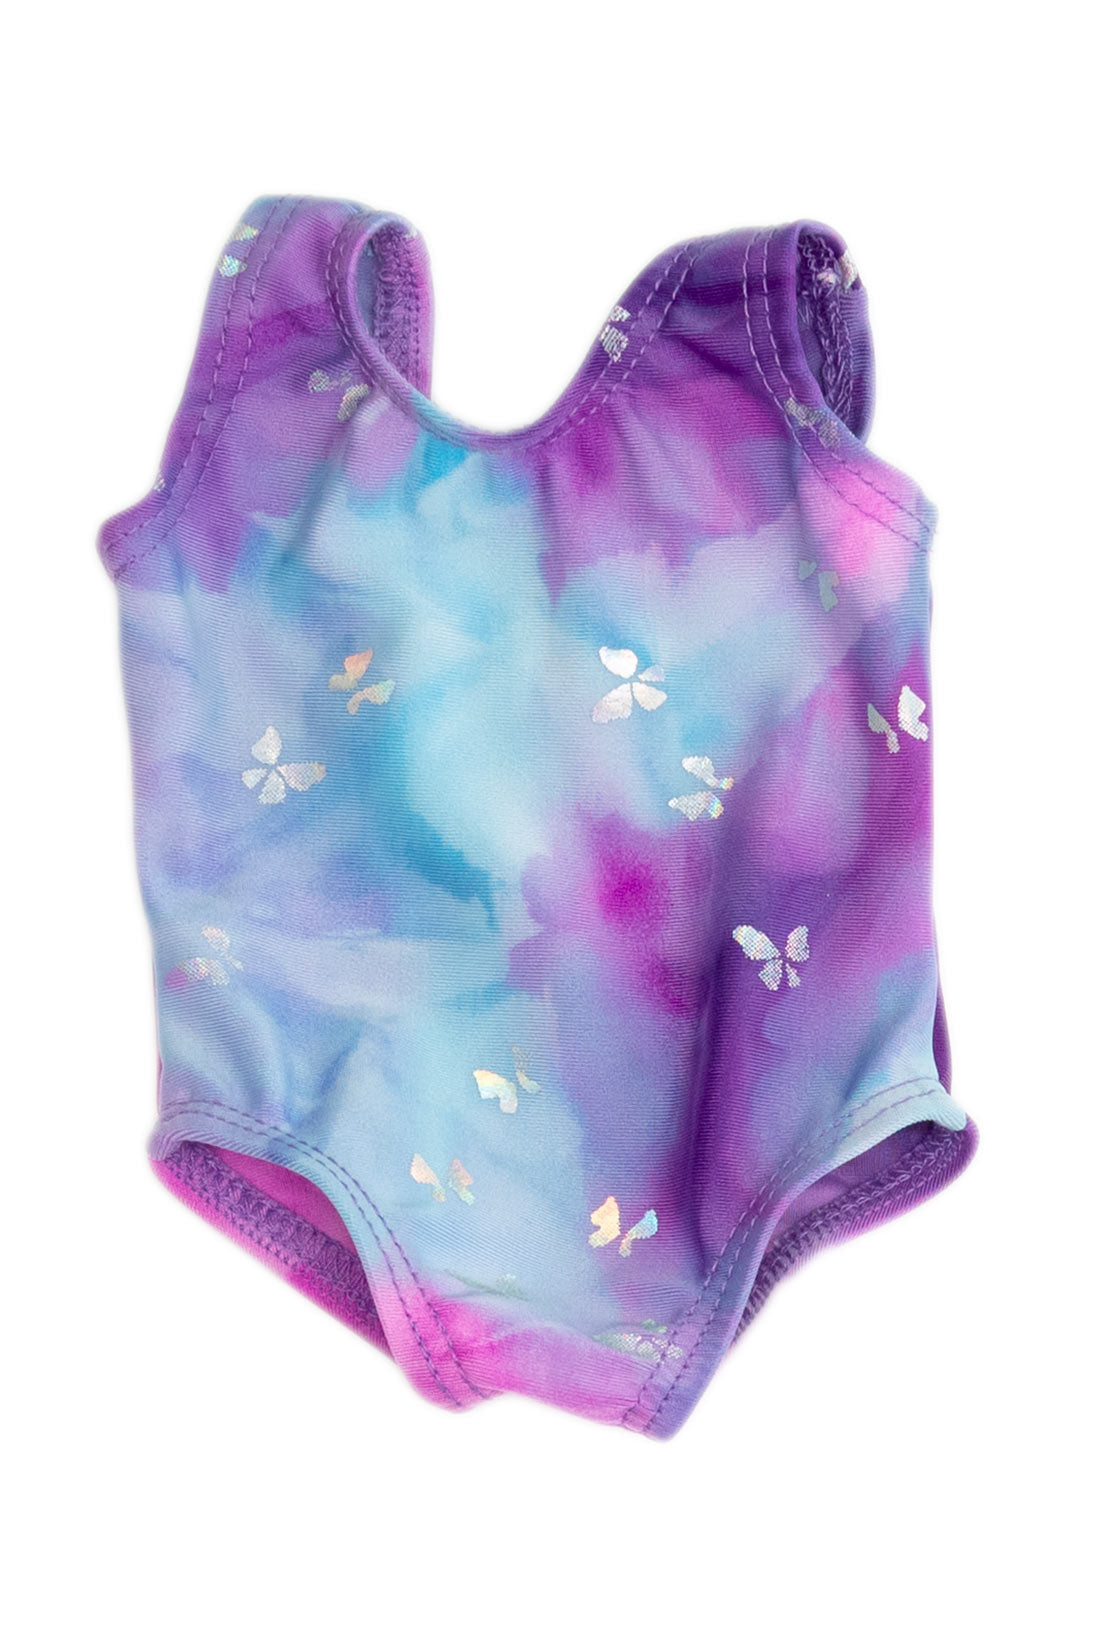 NWT Colsie Heart Pink Blue Bodysuit Size M - $17 New With Tags - From Tiera